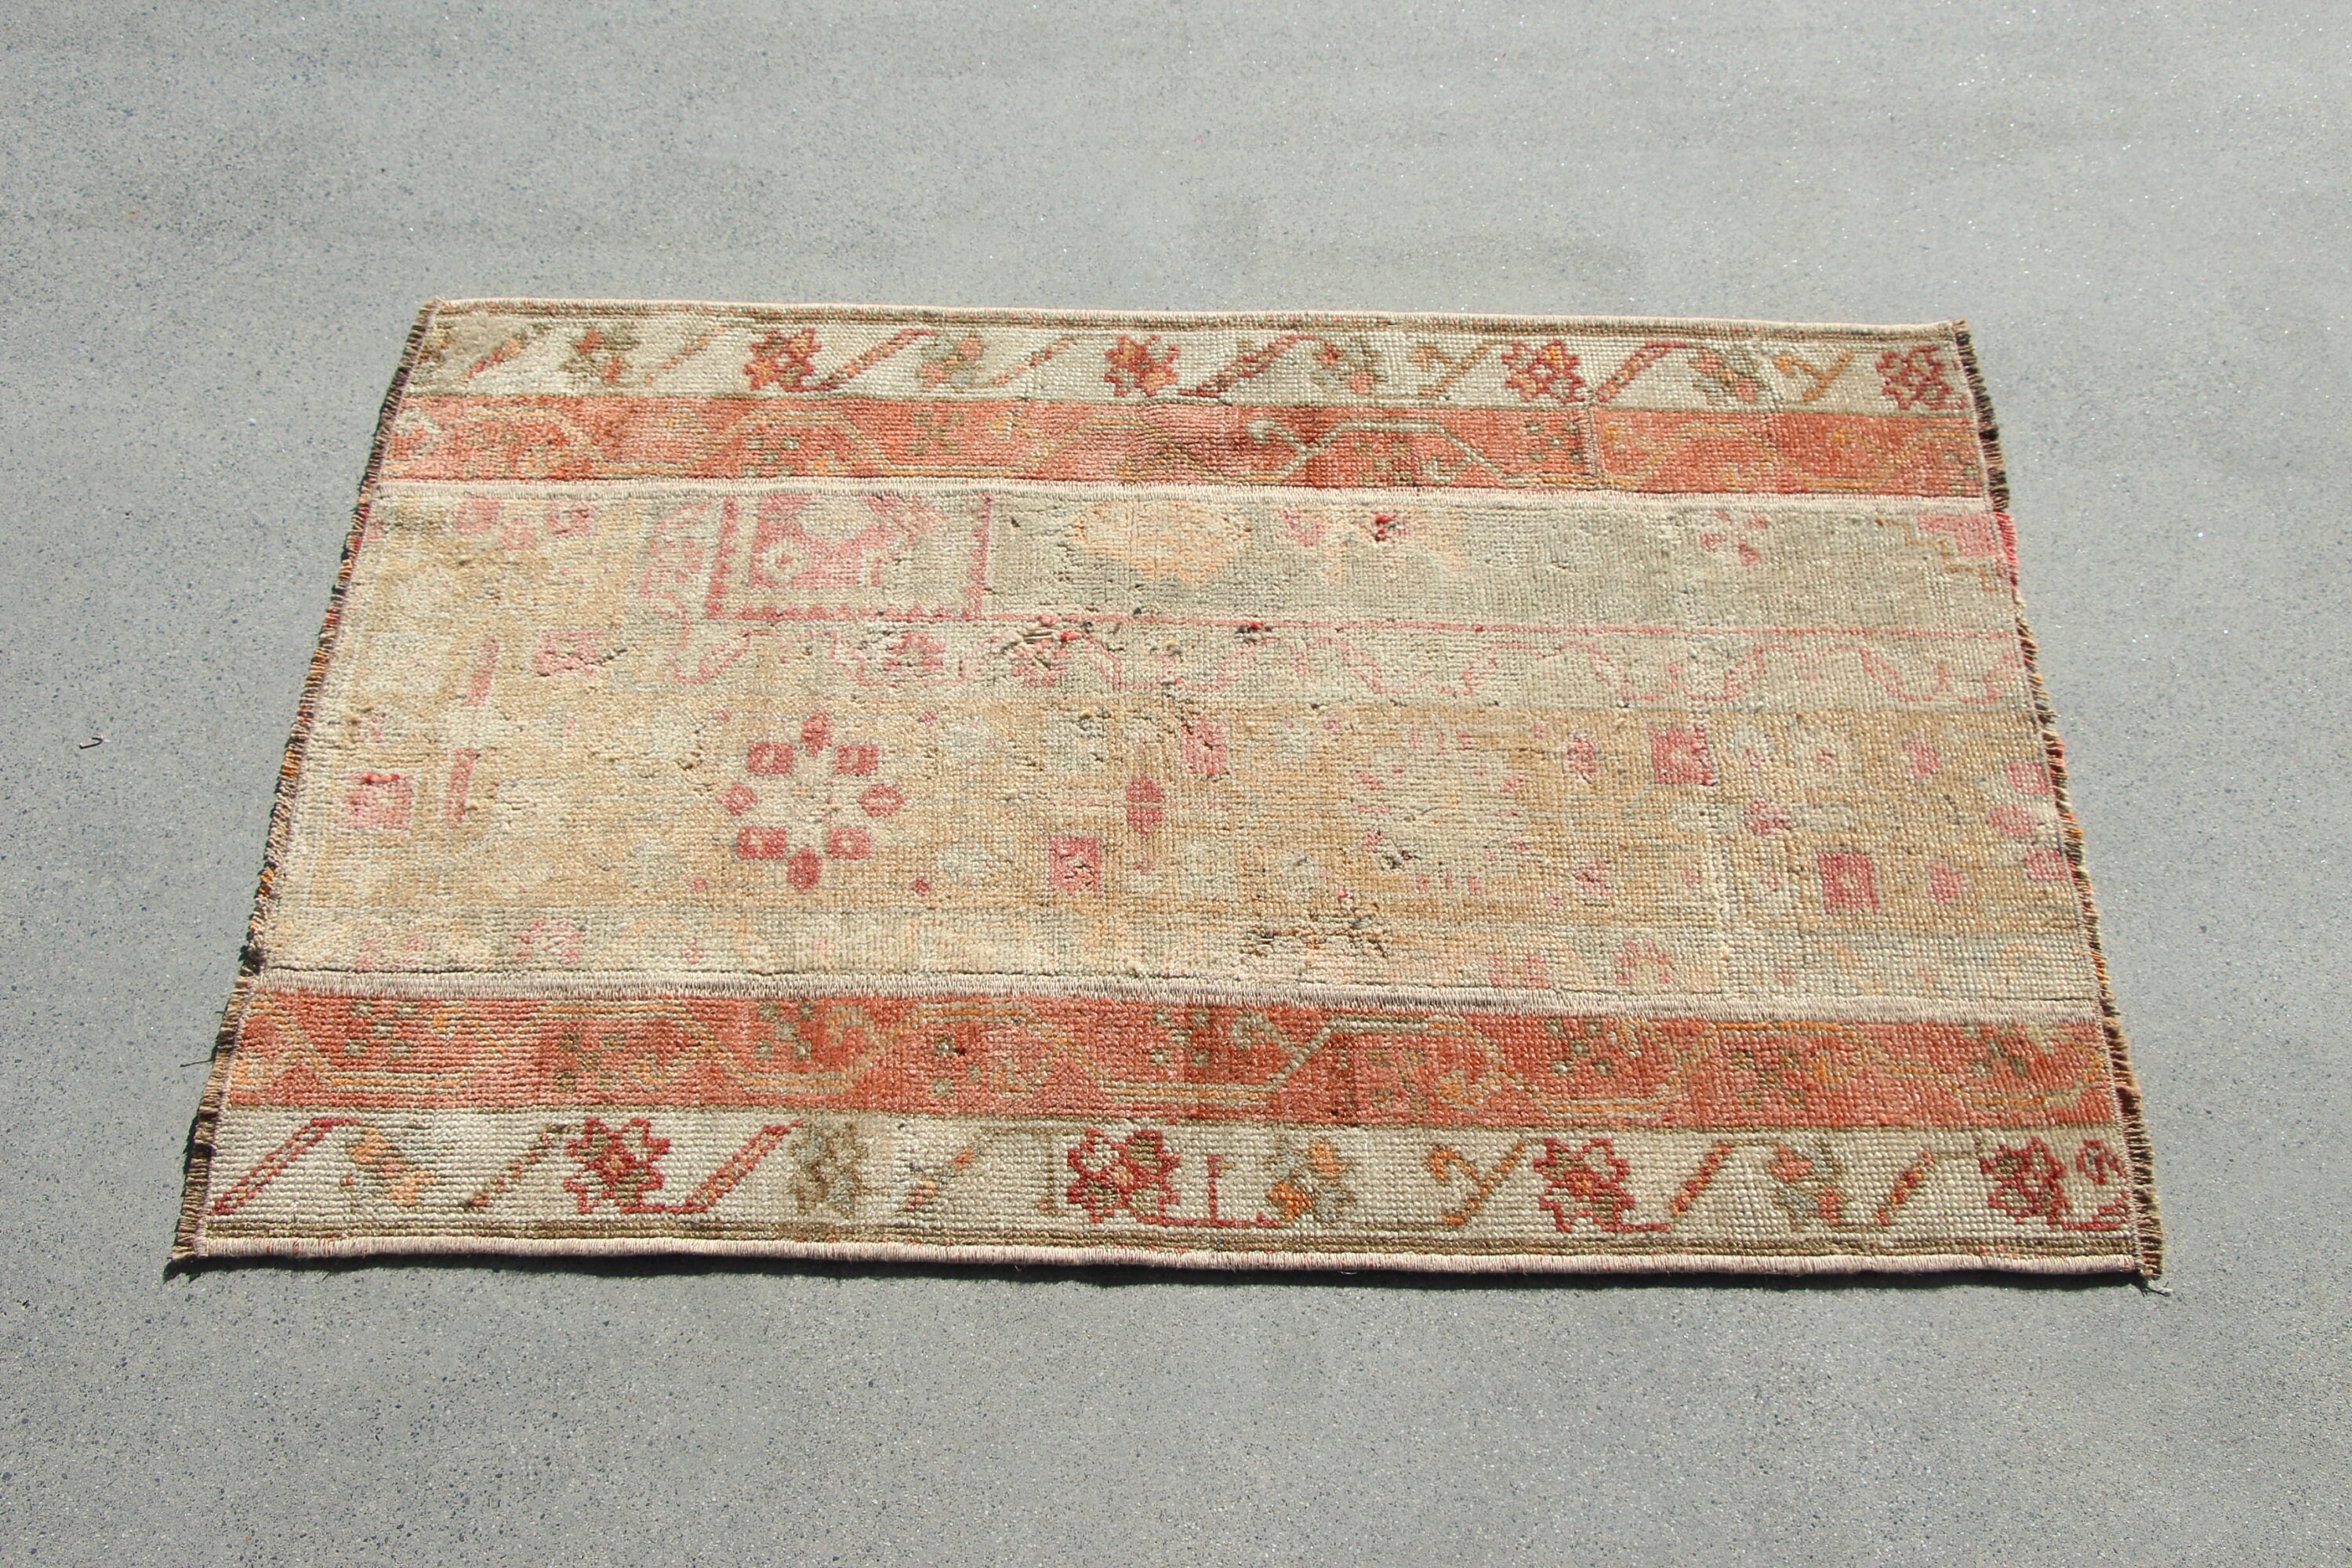 Vintage Rug, White Anatolian Rugs, Anatolian Rug, Bedroom Rugs, Entry Rug, Cool Rug, Rugs for Car Mat, 2.1x3.3 ft Small Rugs, Turkish Rugs